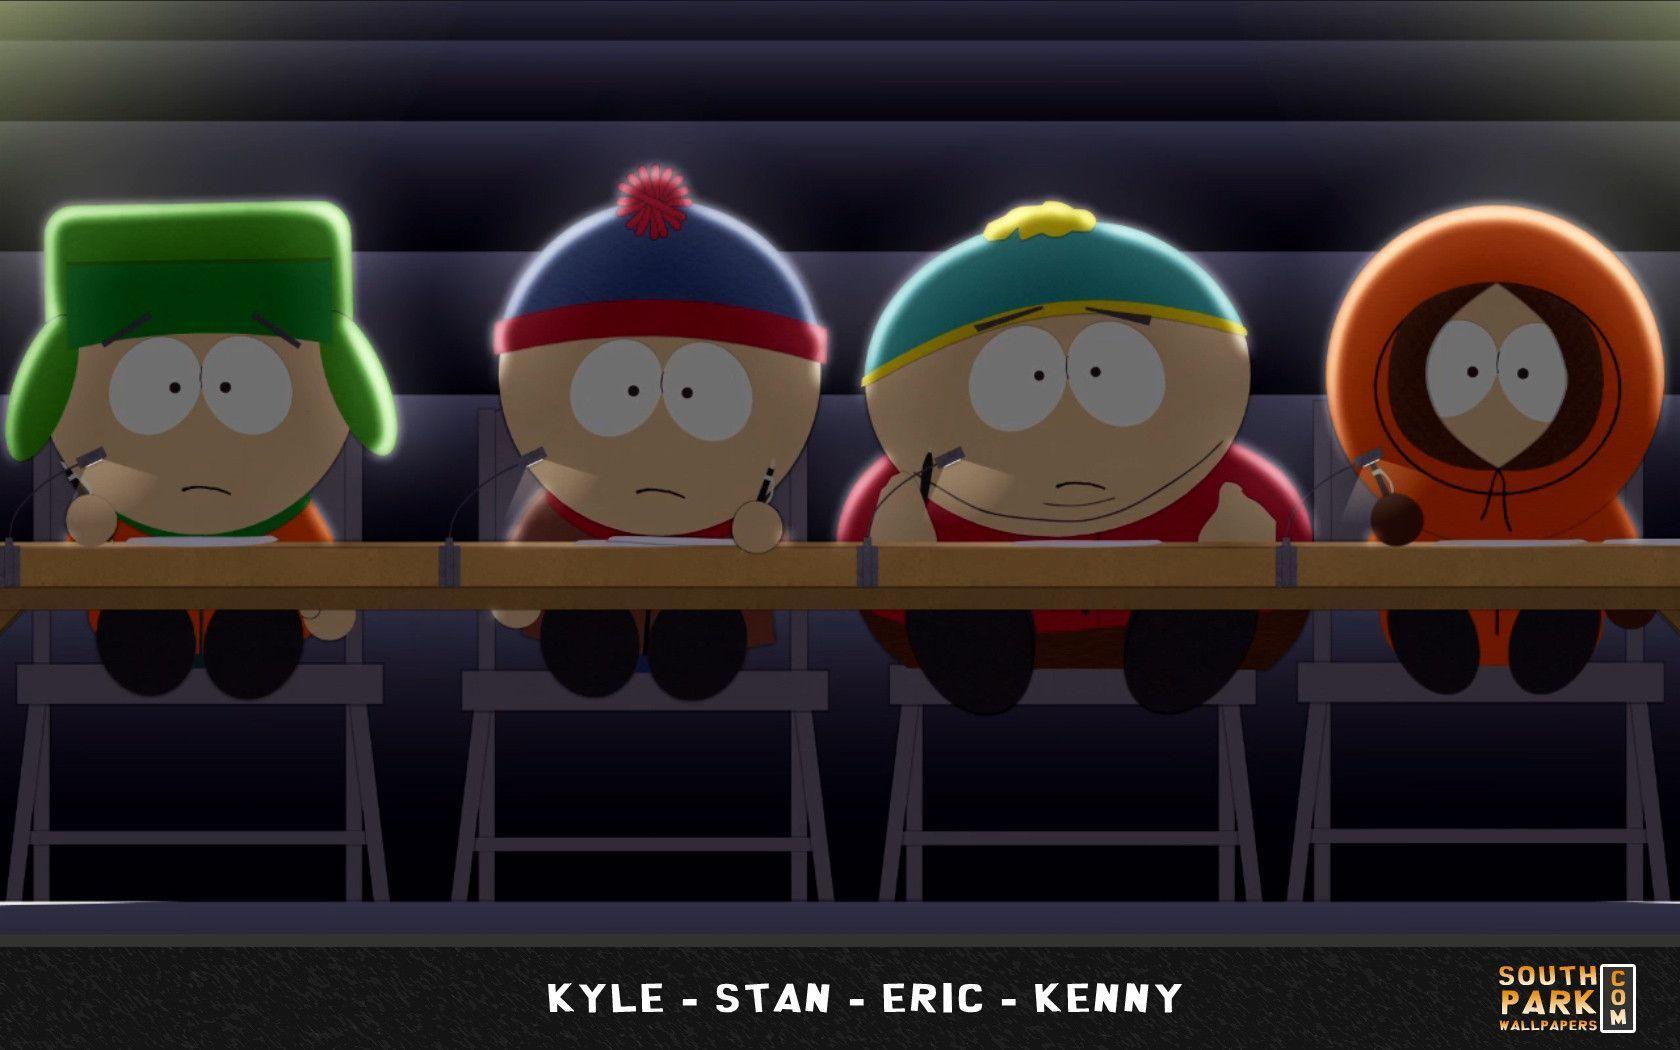 Download Kenny South Park Dead Kyle Wallpaper 1680x1050. Full HD